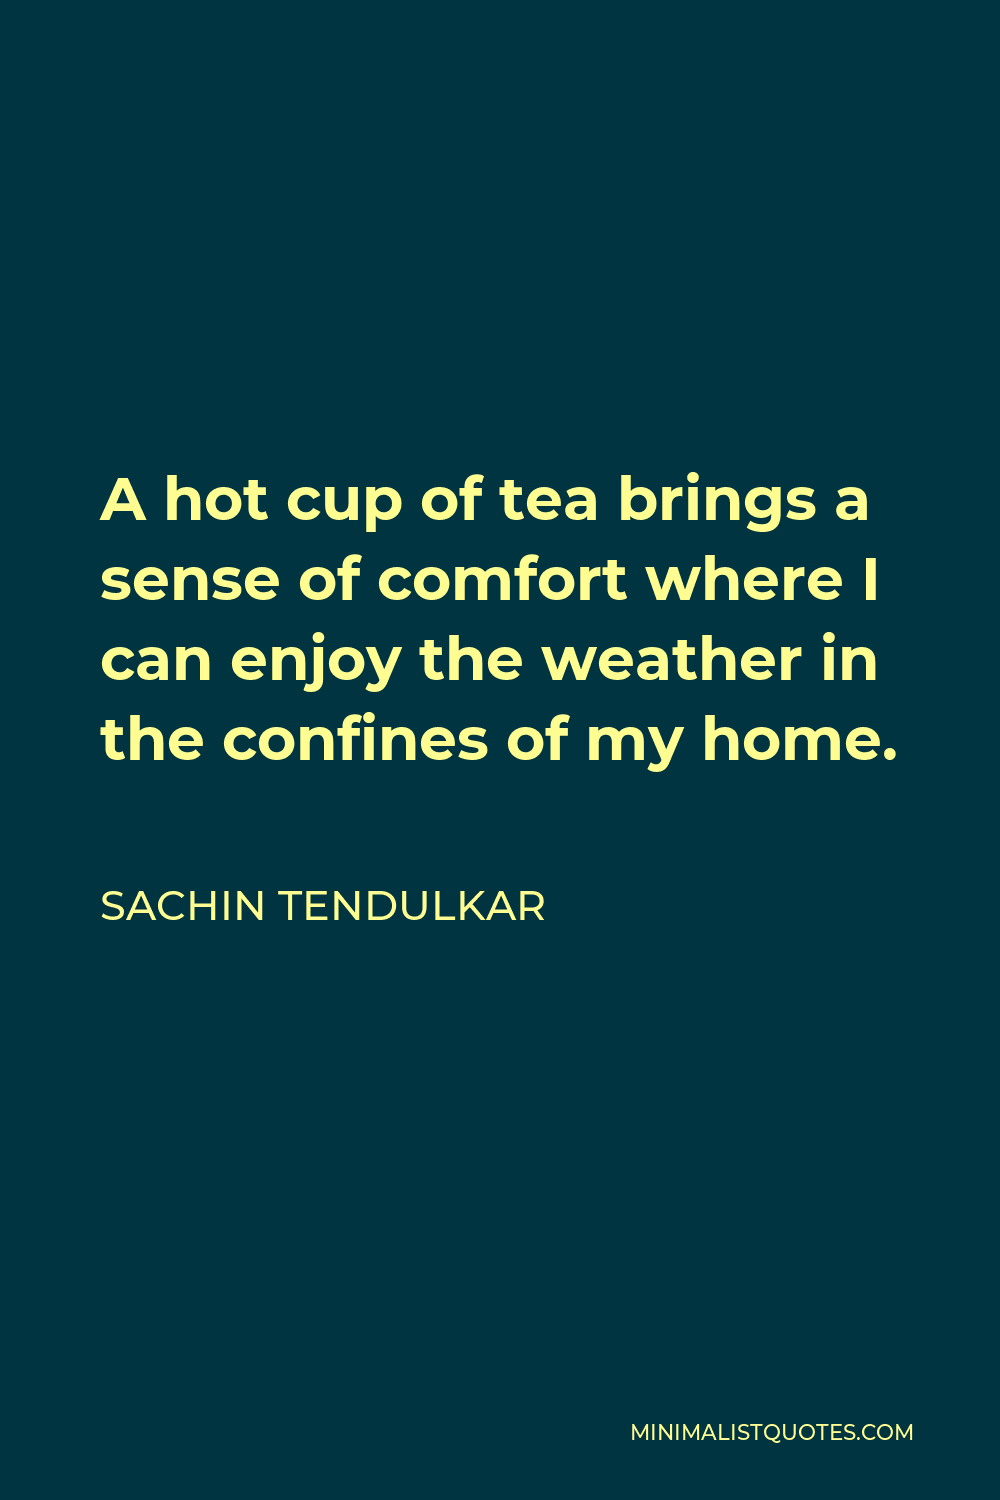 Sachin Tendulkar Quote - A hot cup of tea brings a sense of comfort where I can enjoy the weather in the confines of my home.